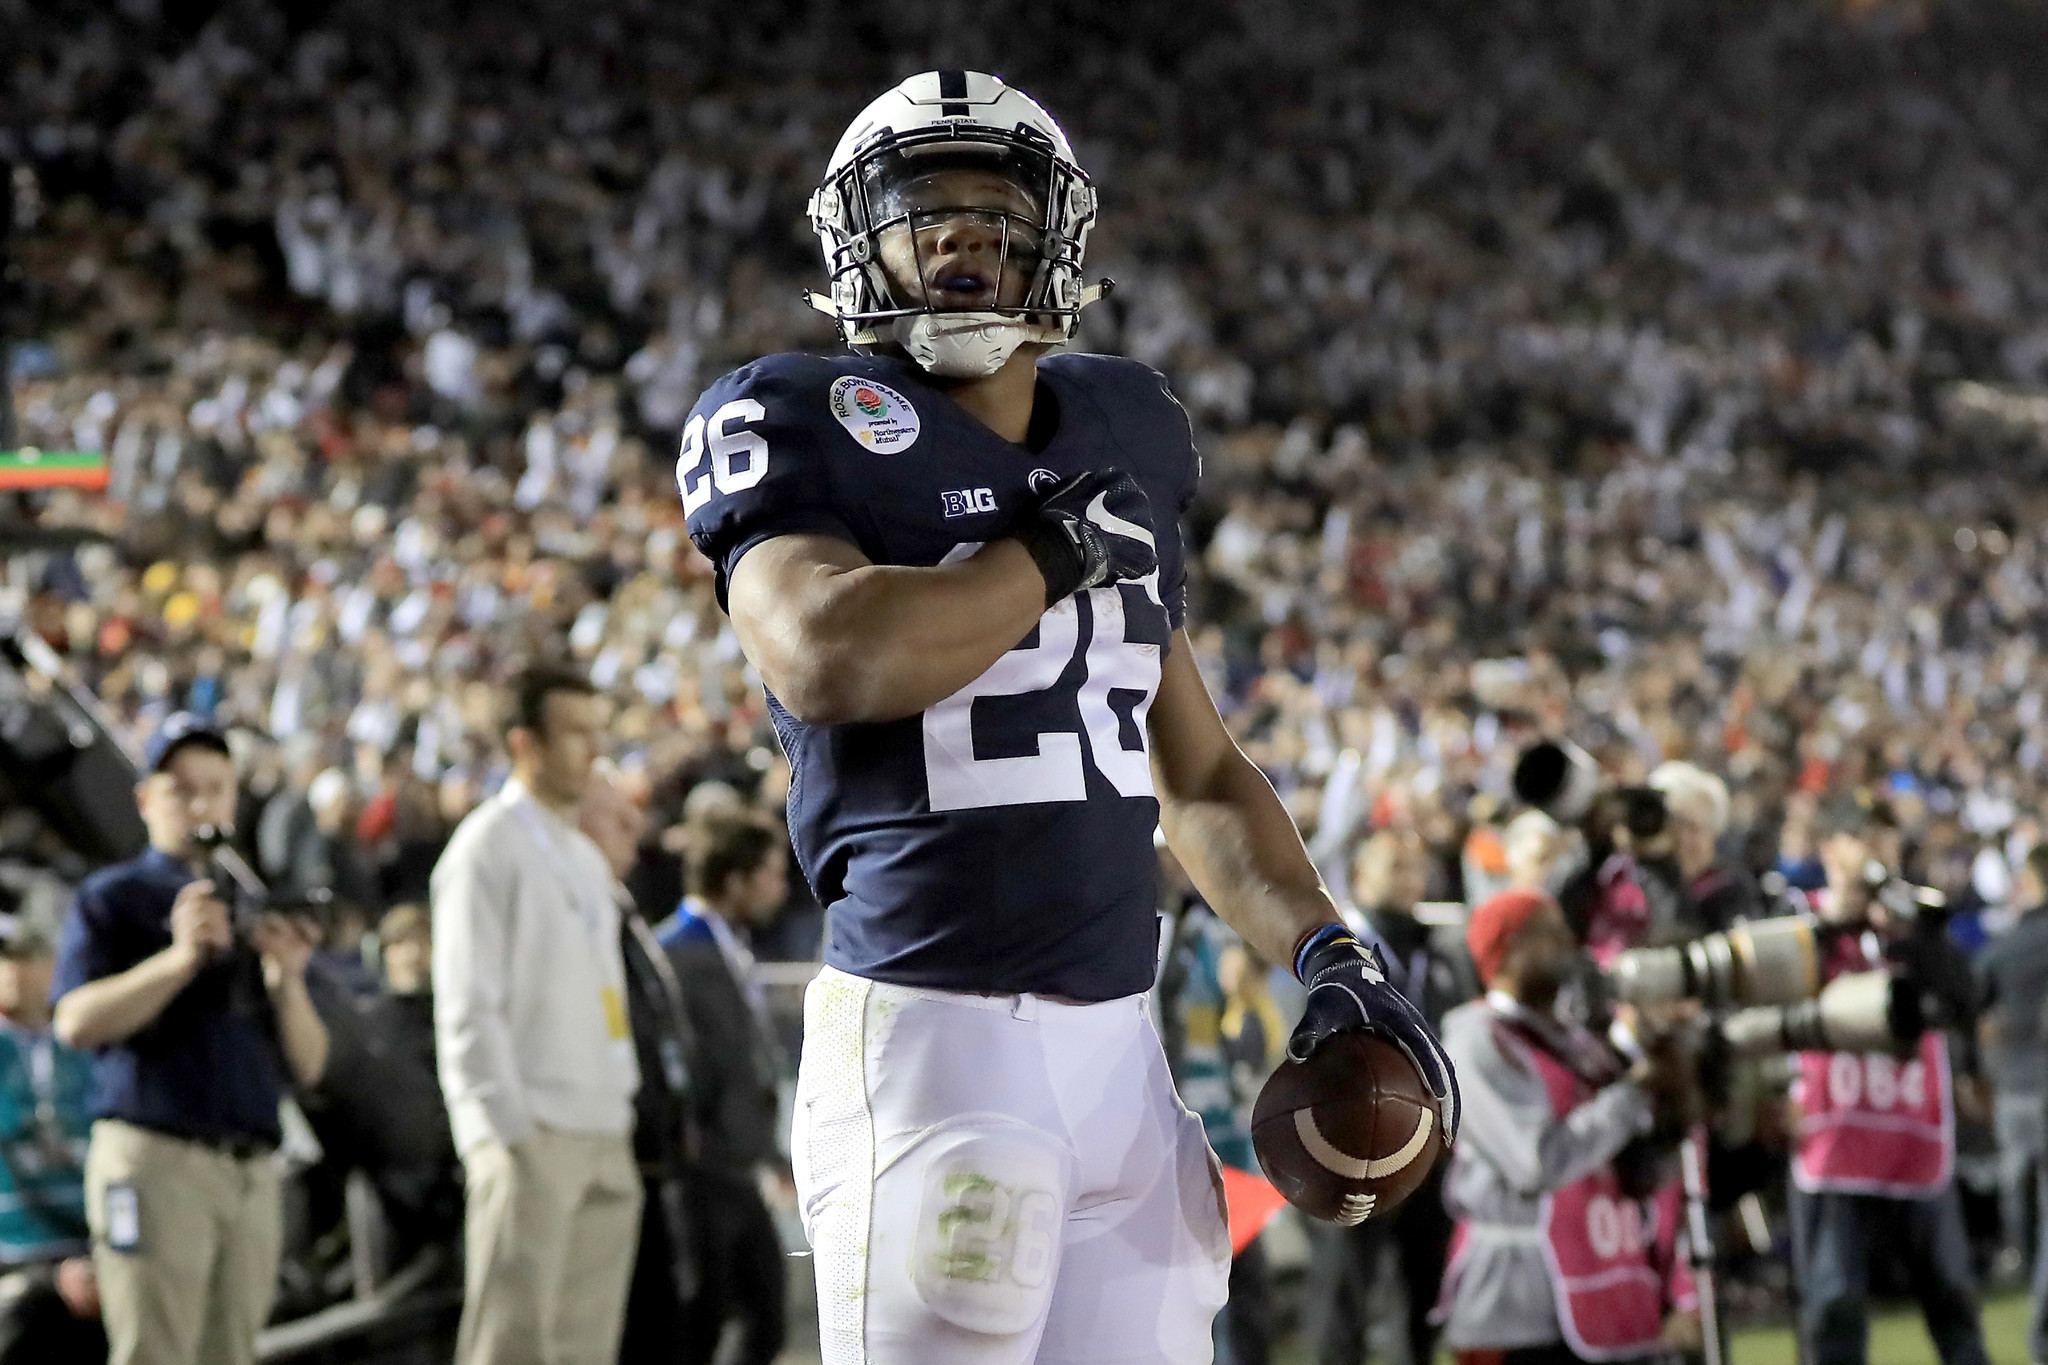 Place Your Bets? Penn State an Unlikely Underdog vs. Ohio State in College Football ‘Game of the Week’